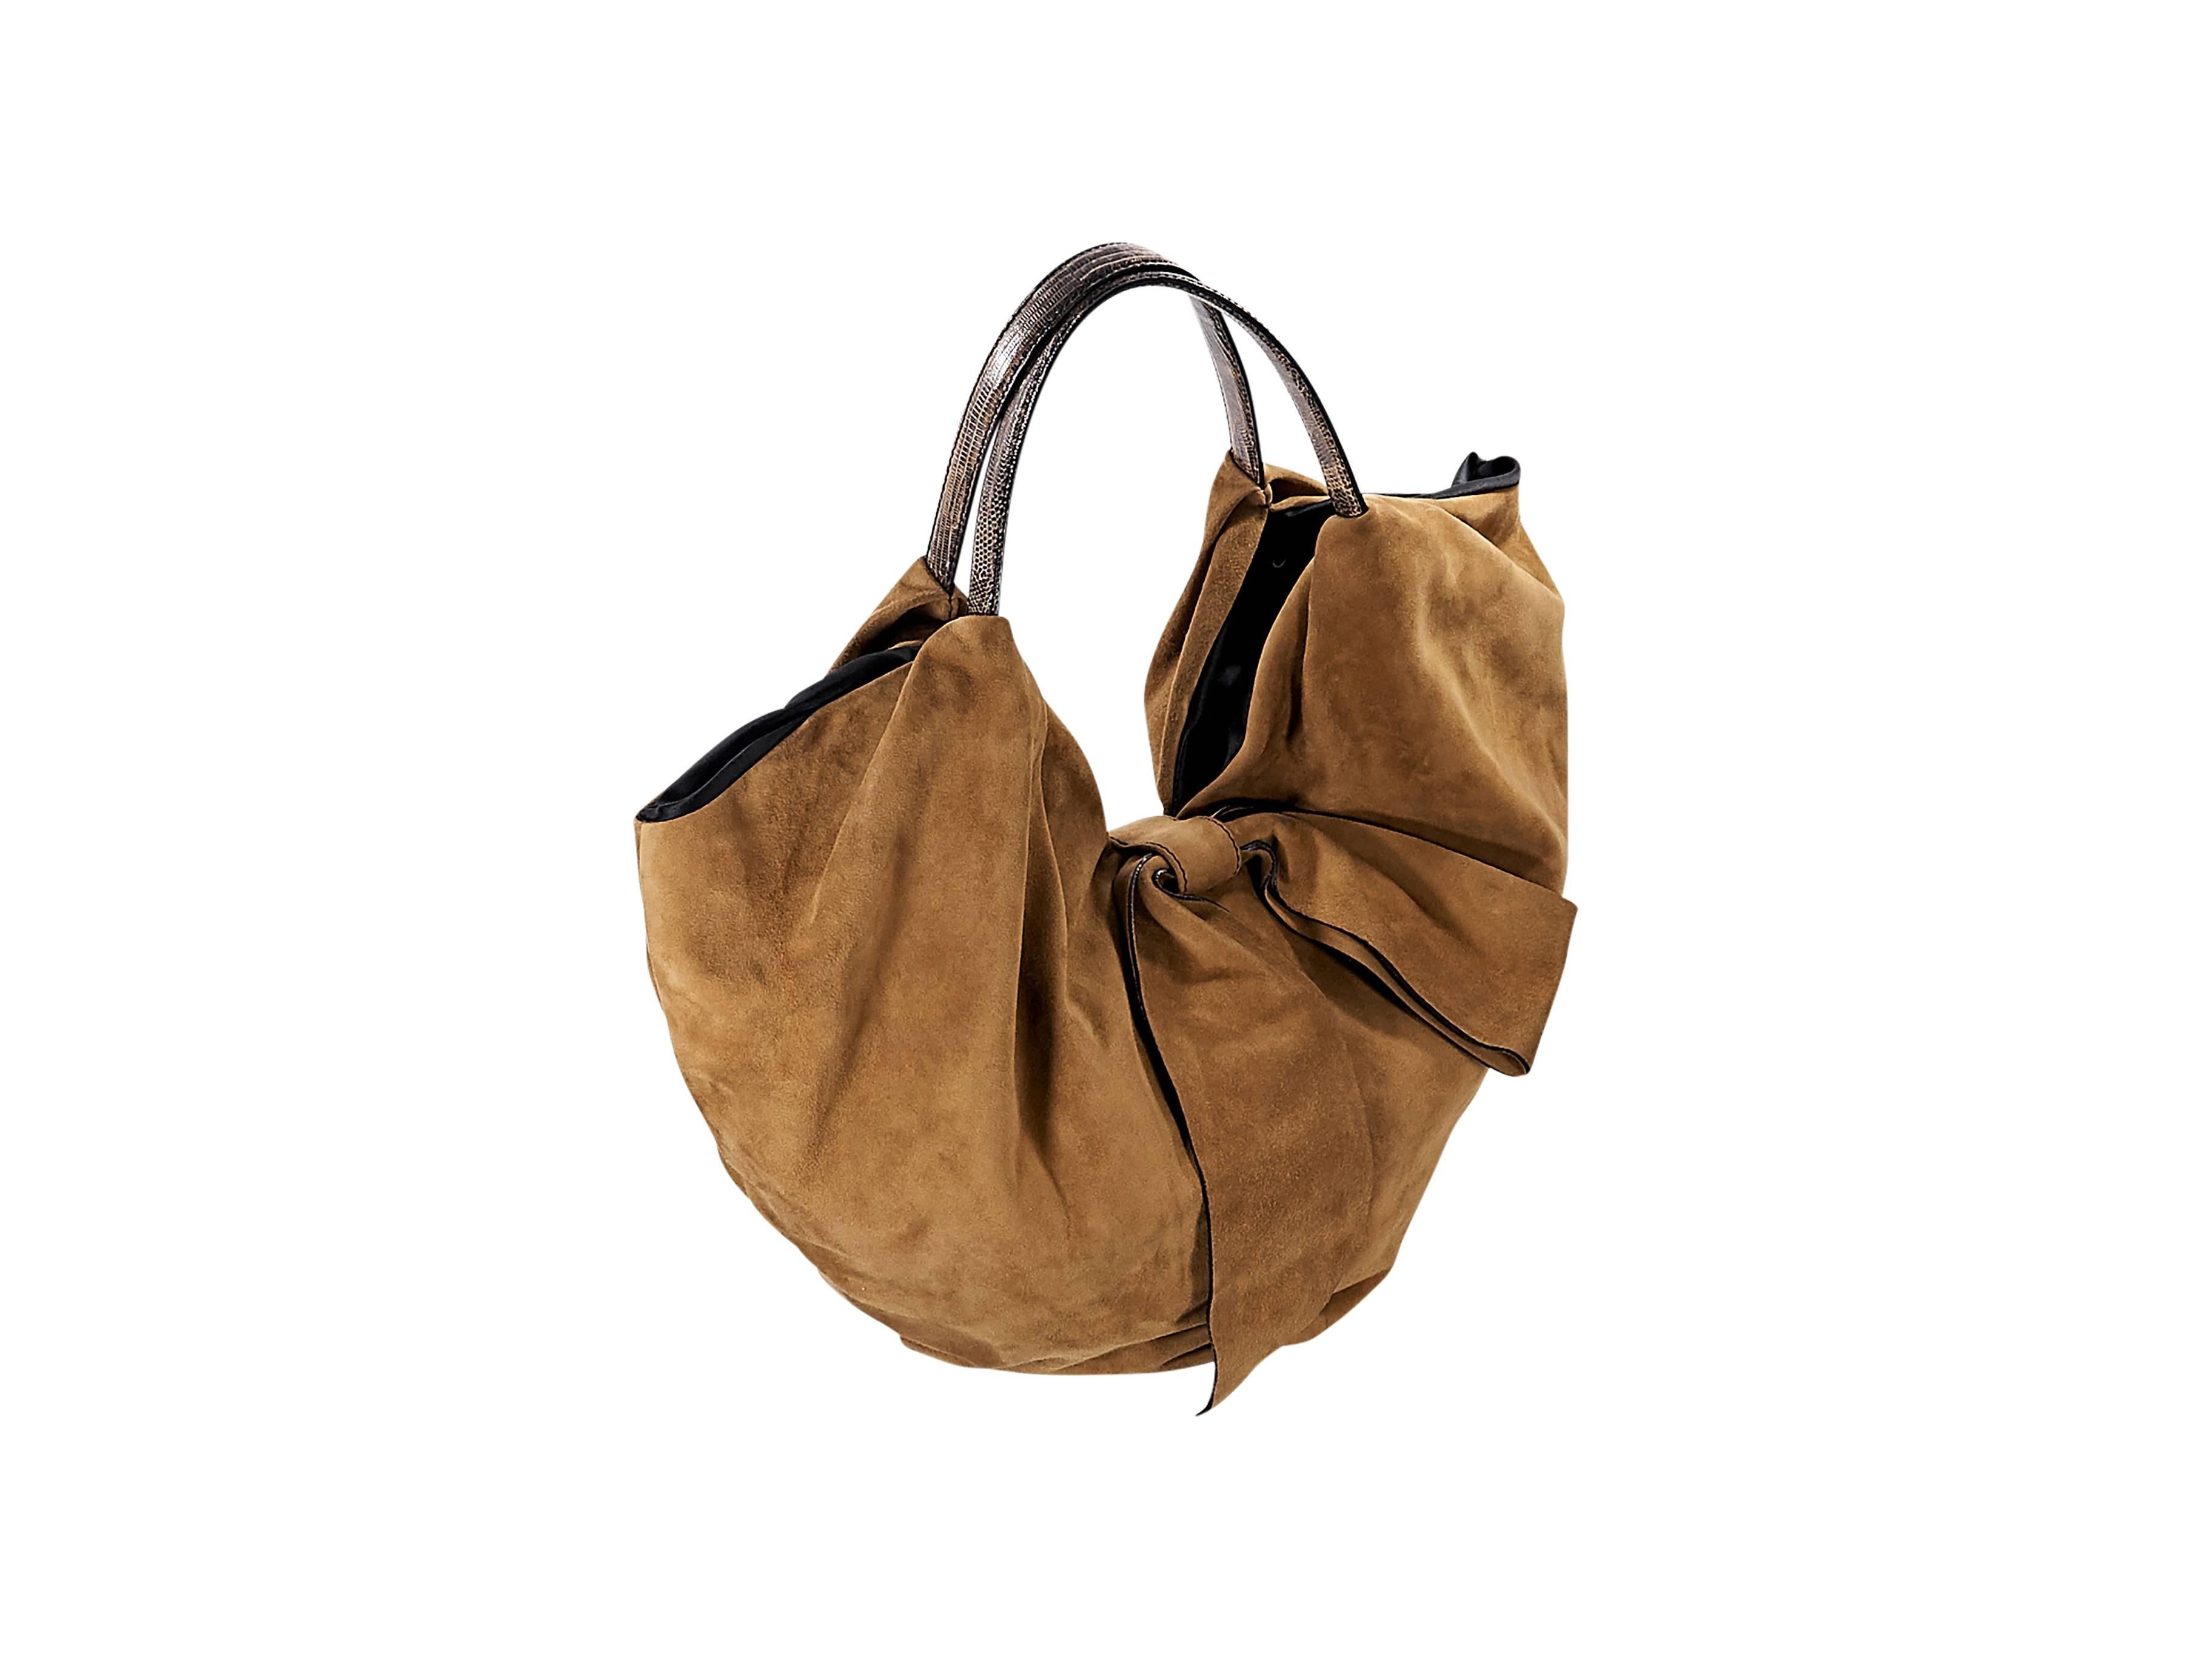 Product details:  Tan suede 360 hobo bag by Valentino.  Dual shoulder straps.  Top magnetic tab closure.  Lined interior with inner zip and slide pockets.  Goldtone hardware.  21